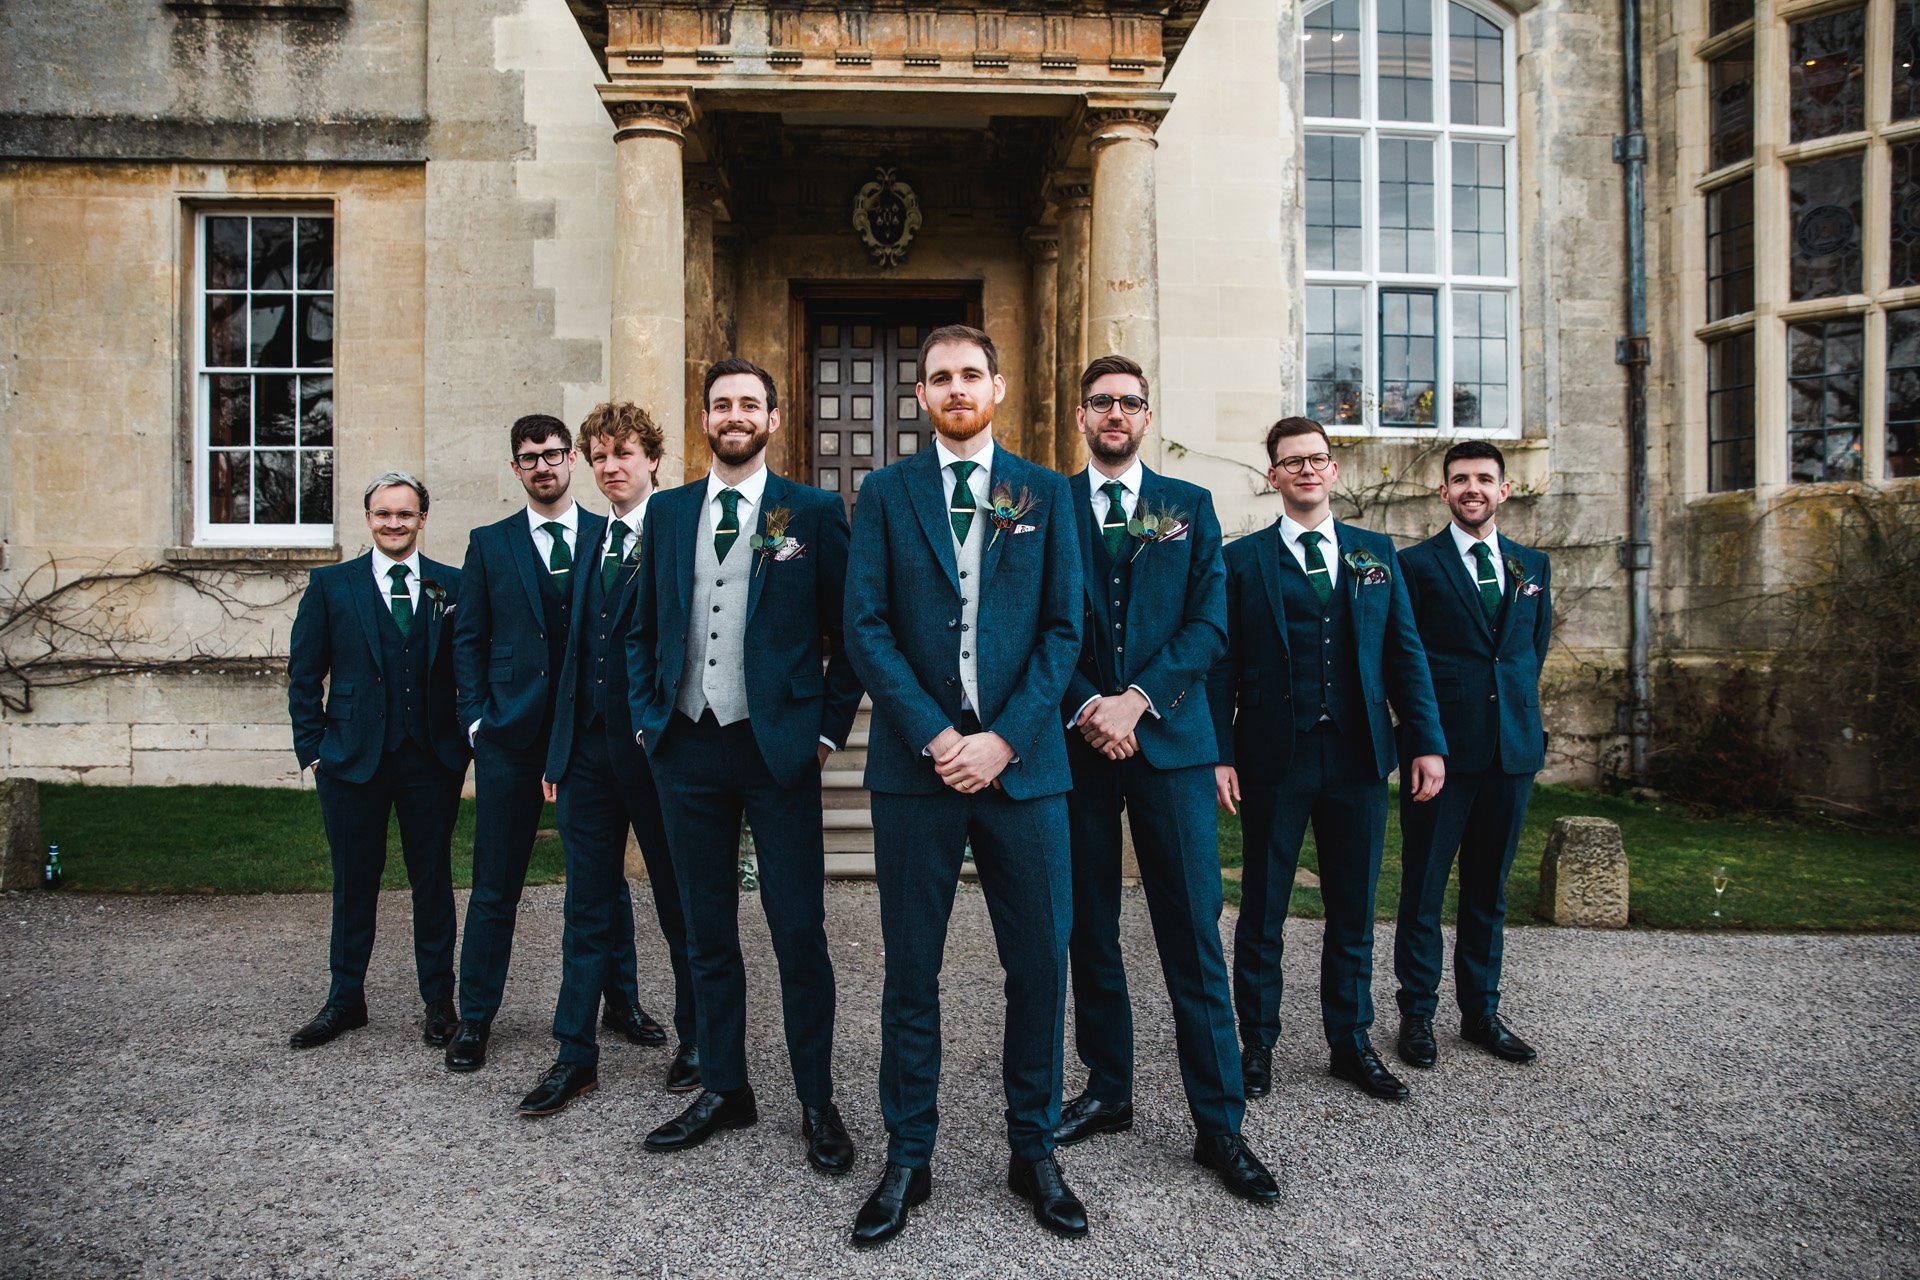 7 smartly dressed Groomsmen stand to attention outside grade 2 listed mansion house weekend wedding venue